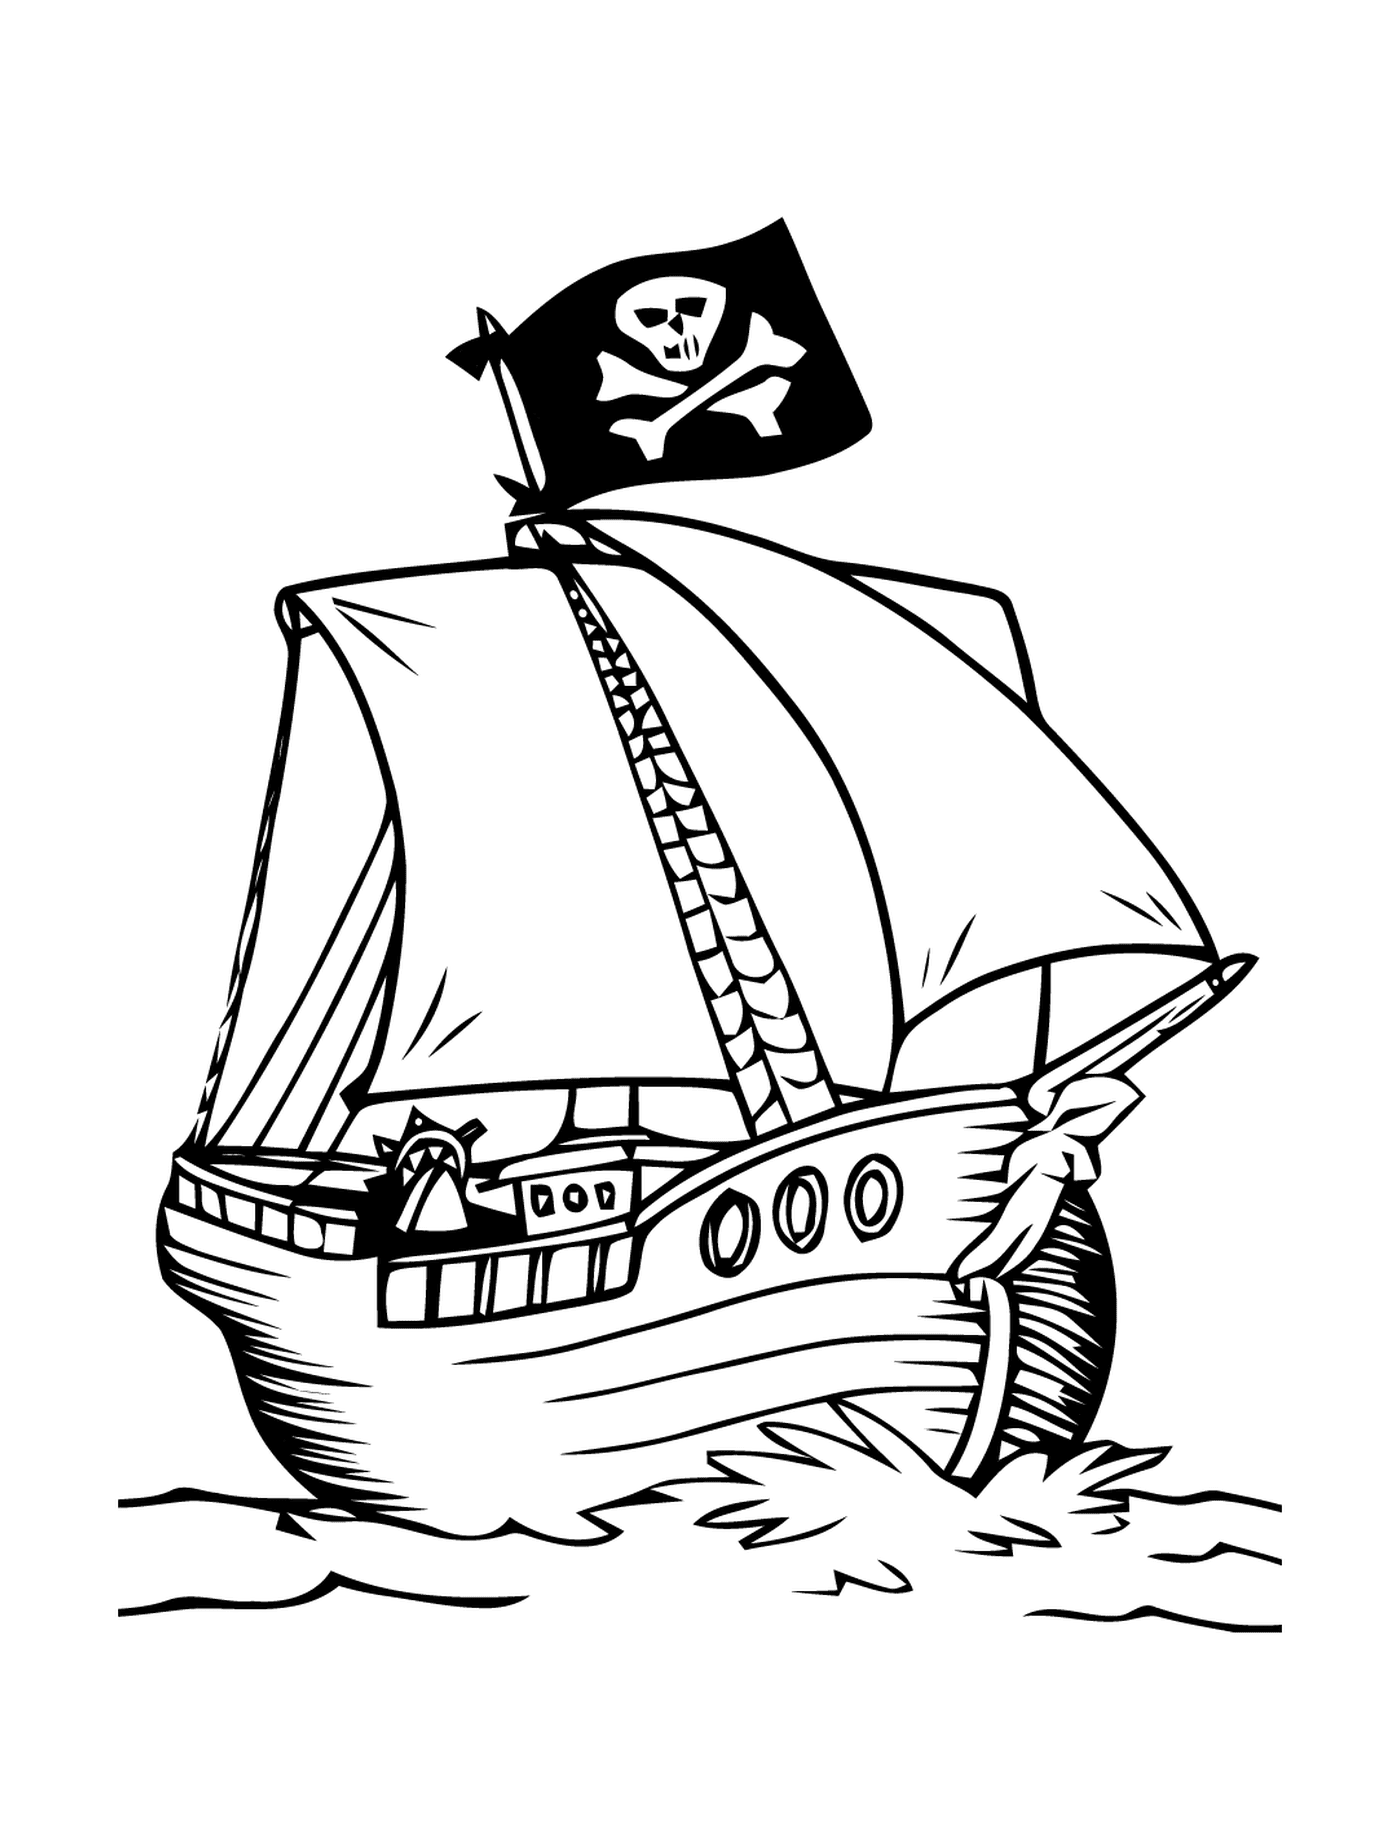  Pirate boat with scary flag 